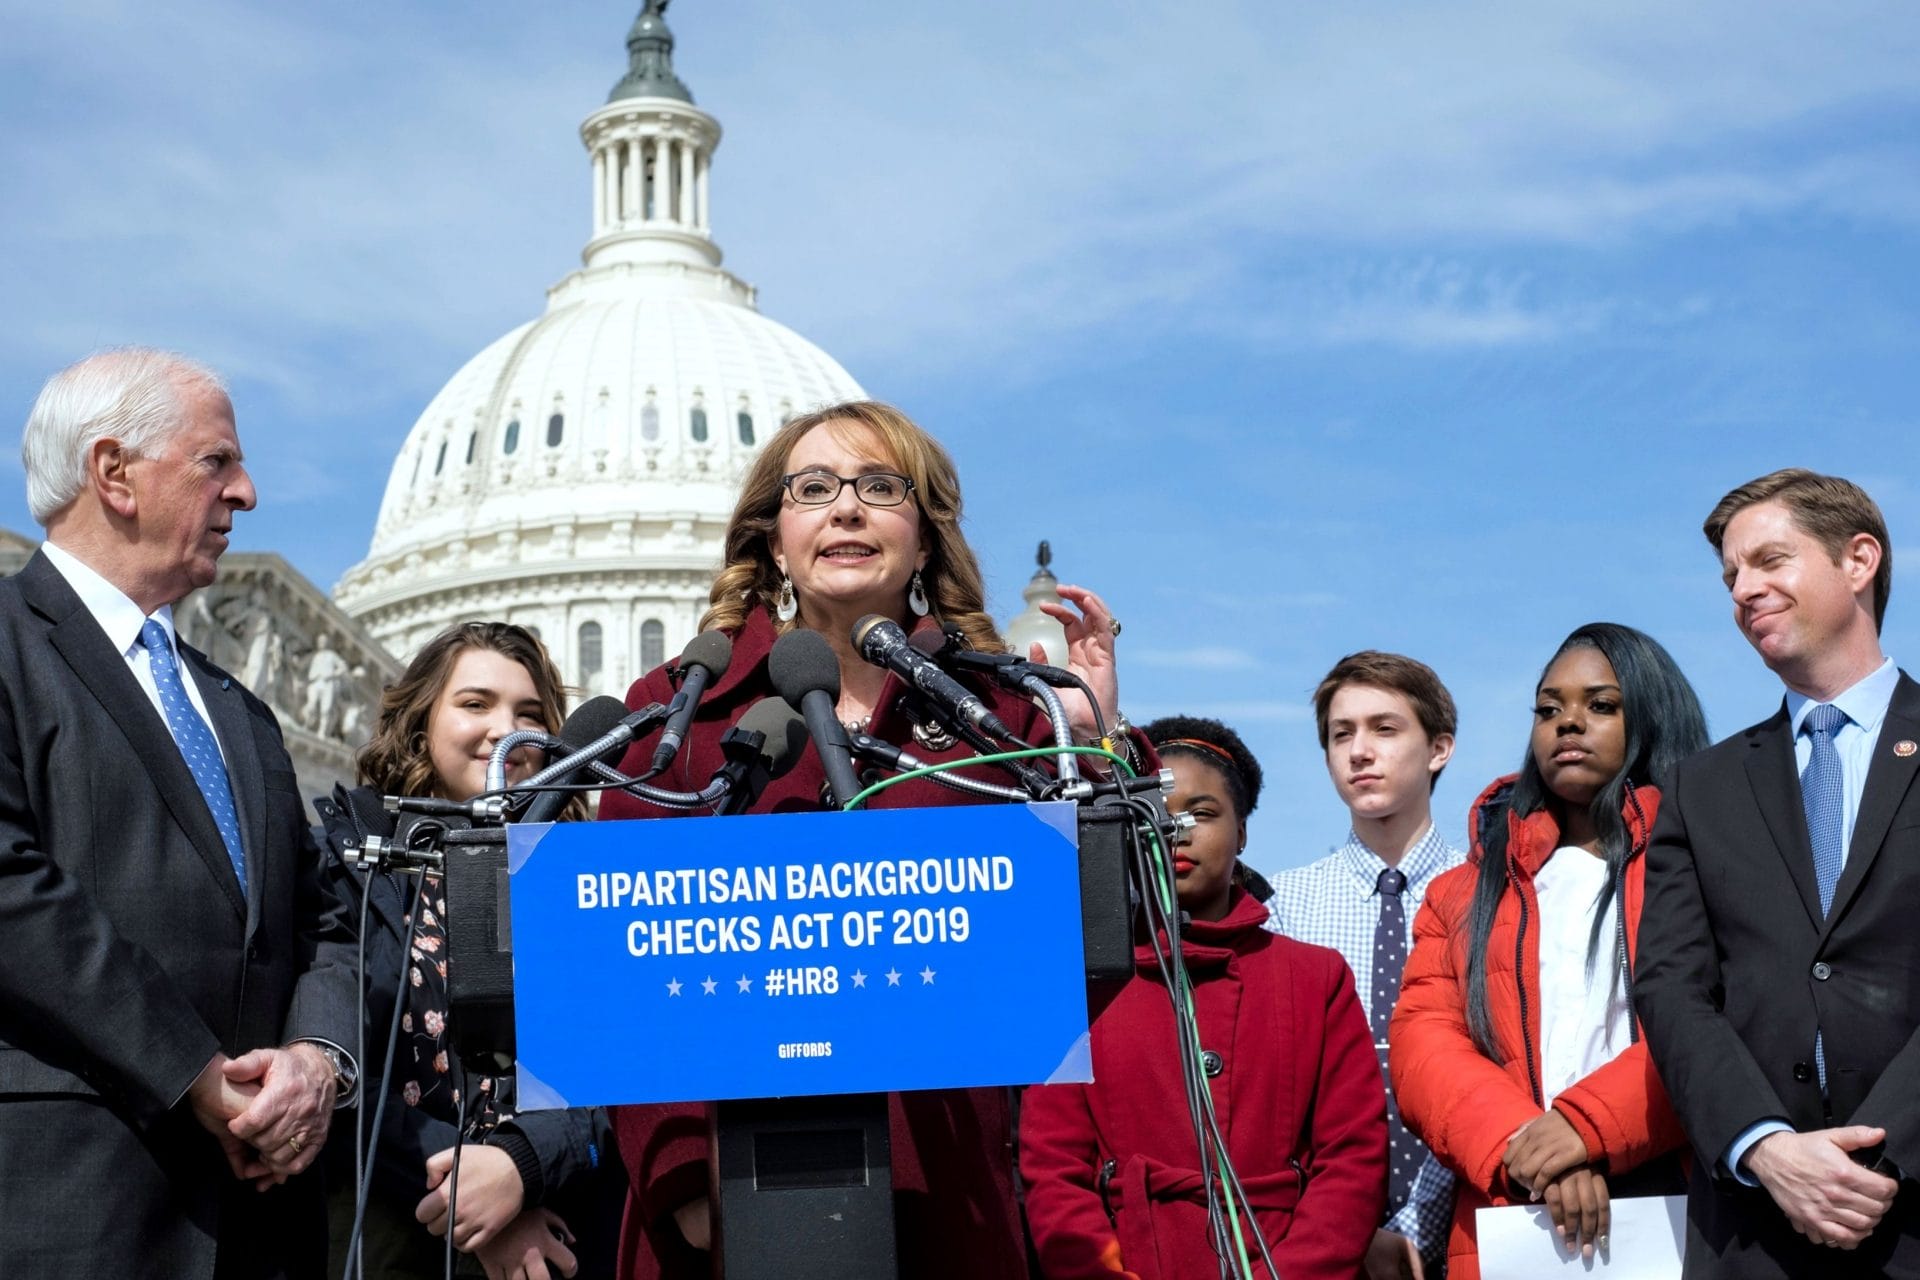 On Tuesday, February 26, former Rep. Gabrielle Giffords, lawmakers, and student leaders from across the country called on Congress to pass the background checks legislation.